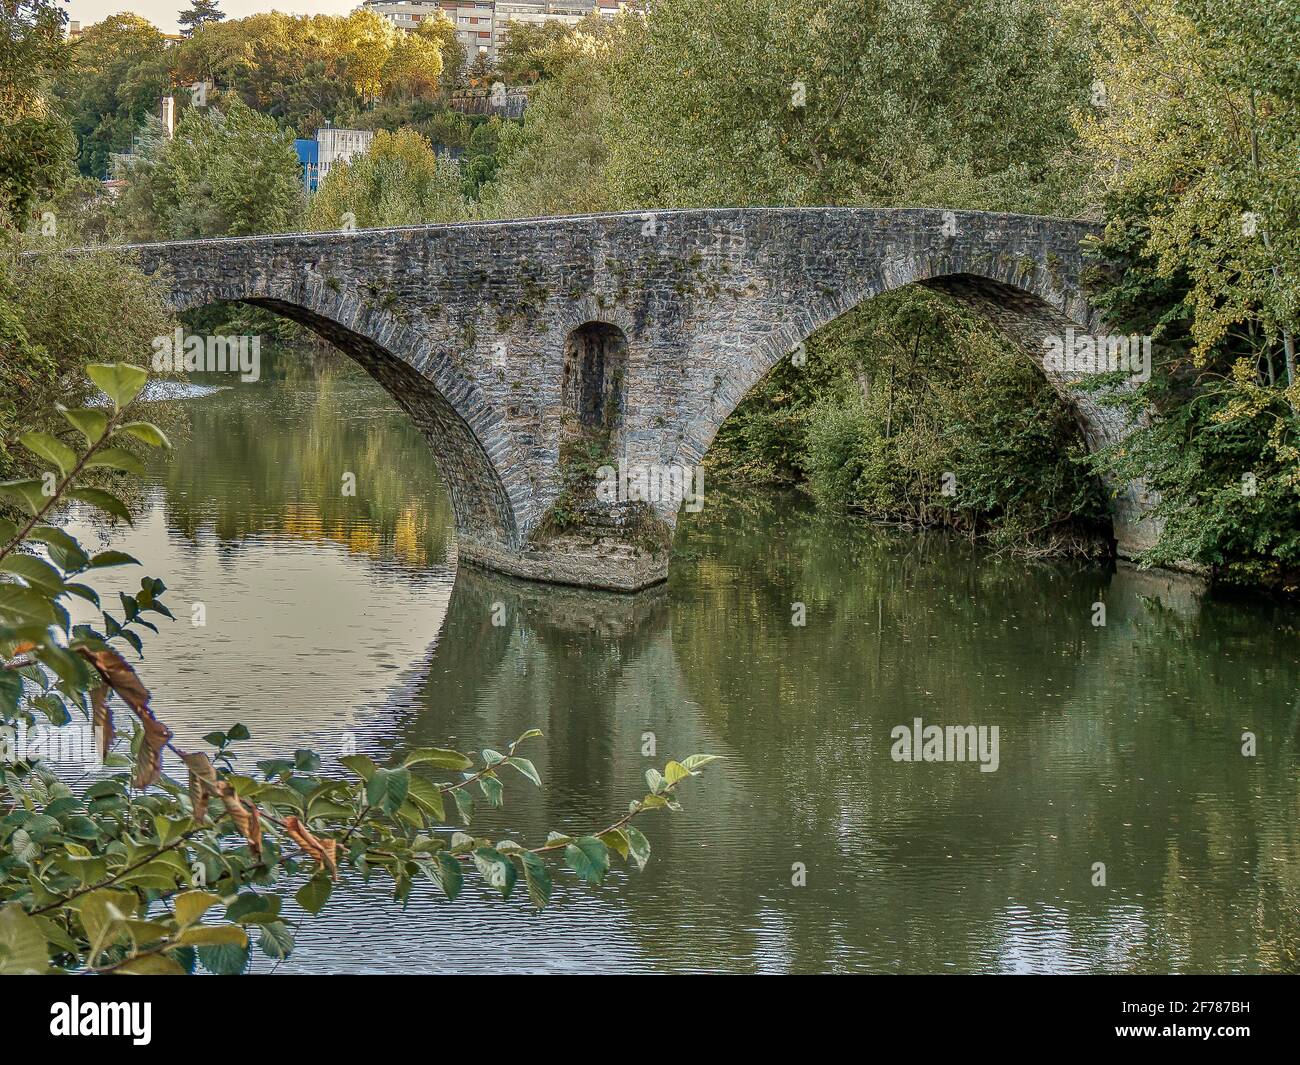 the stone bridge Puente Magdelena with two arches over the Rio Arga in Pamplona, Spain, October 15, 2009 Stock Photo